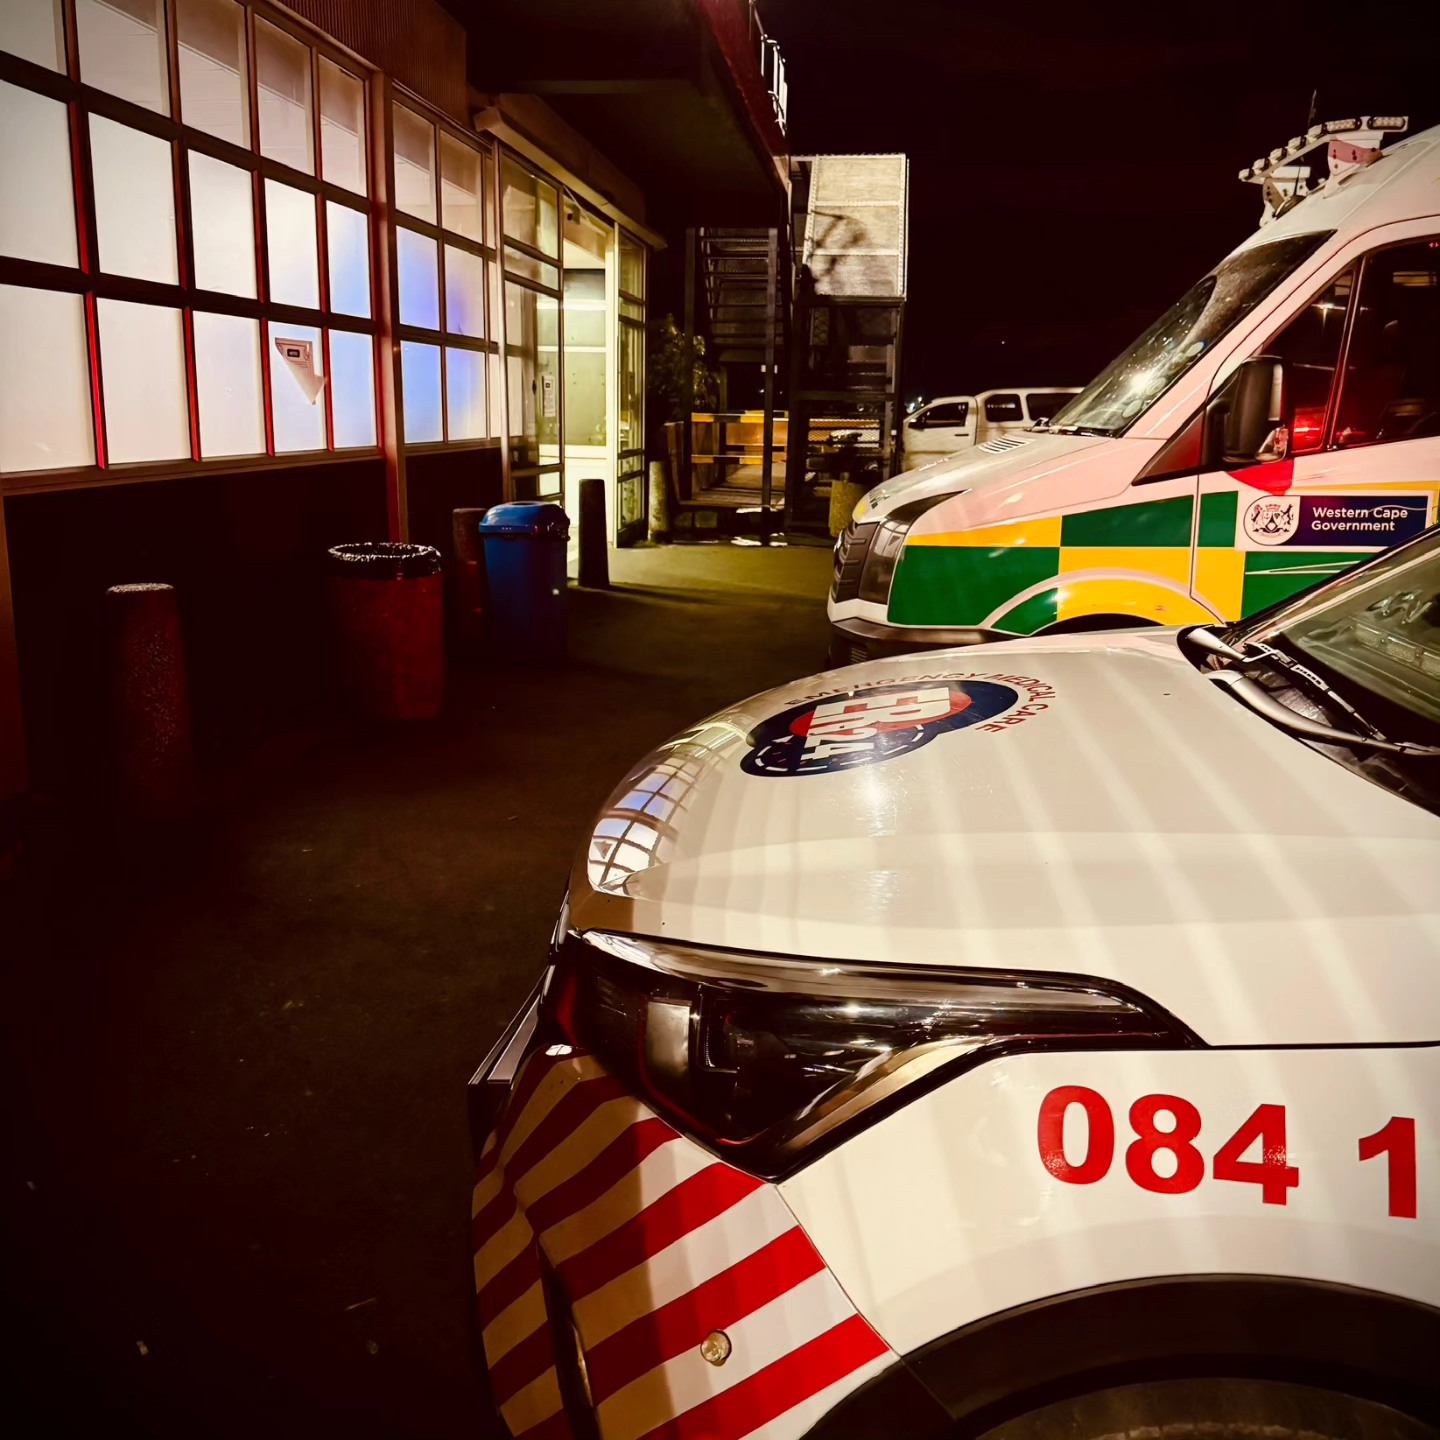 Two injured in a shooting incident on the Joostenberg Vlakte